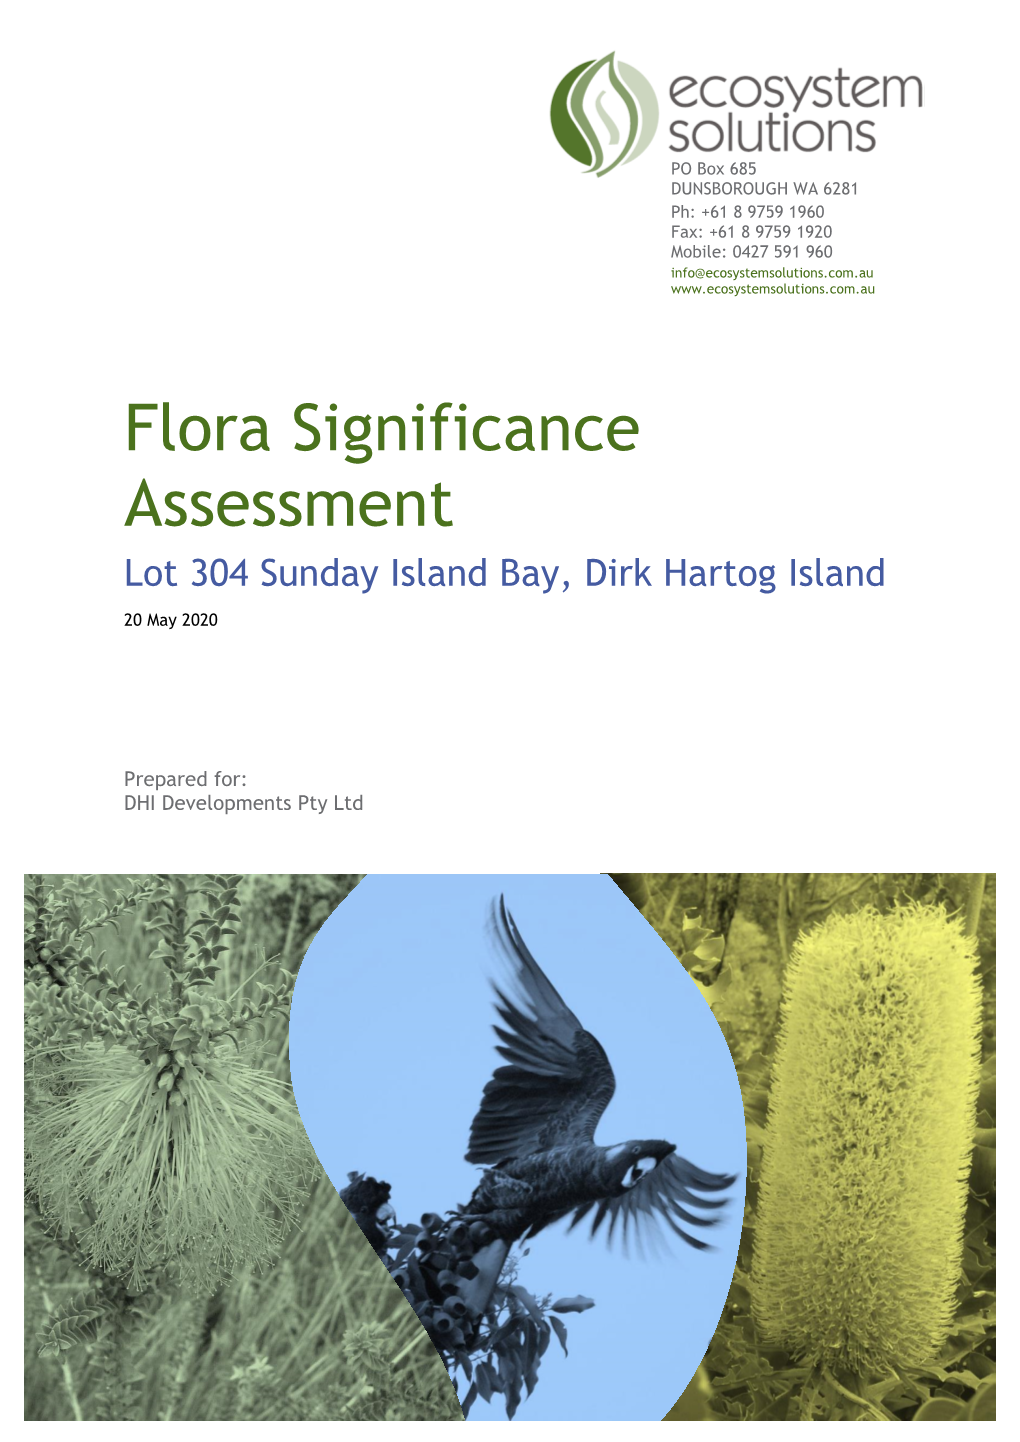 13.1 Flora Significance Assessment Report